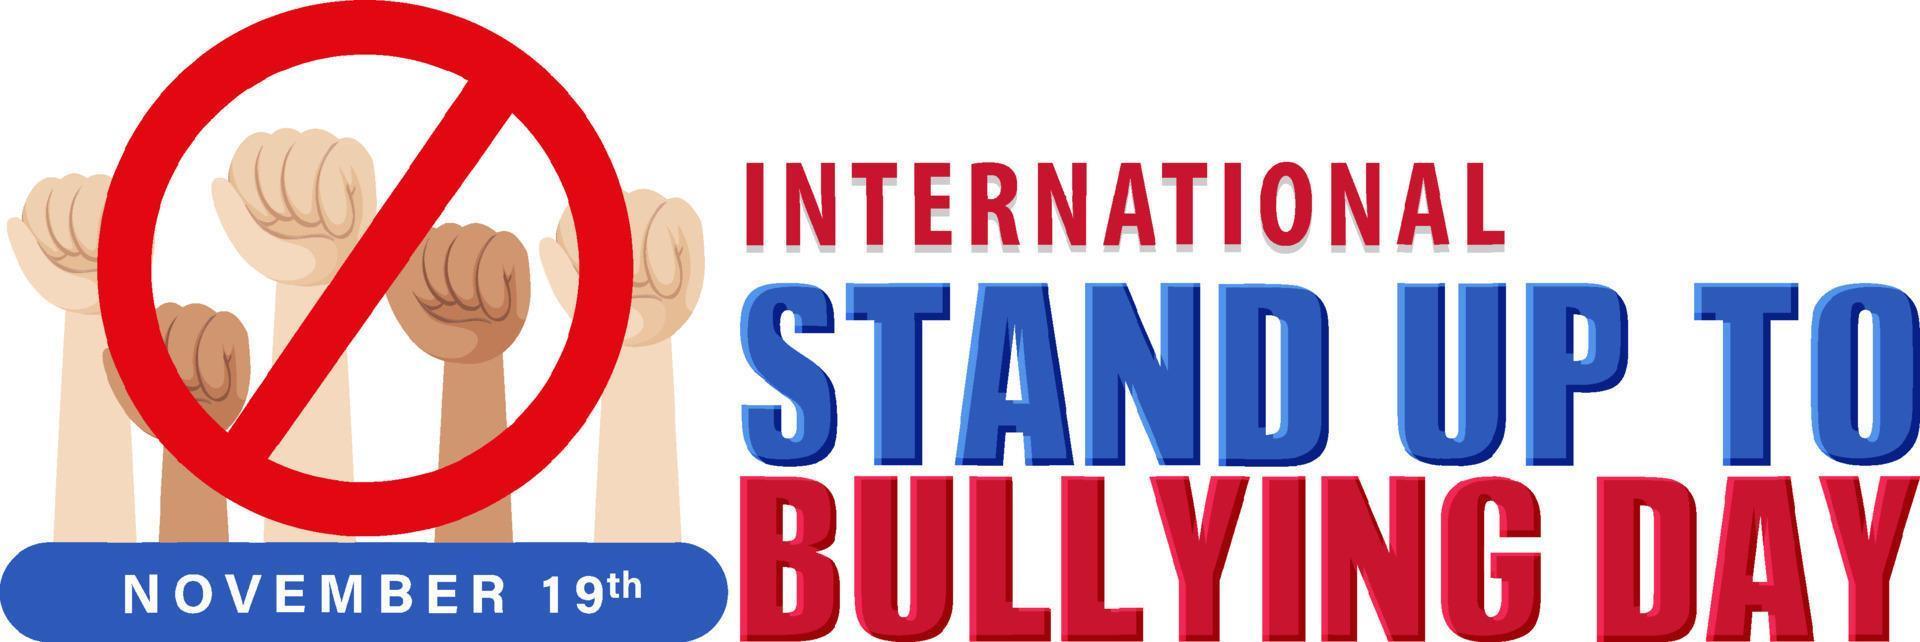 International stand up to bullying day poster design vector